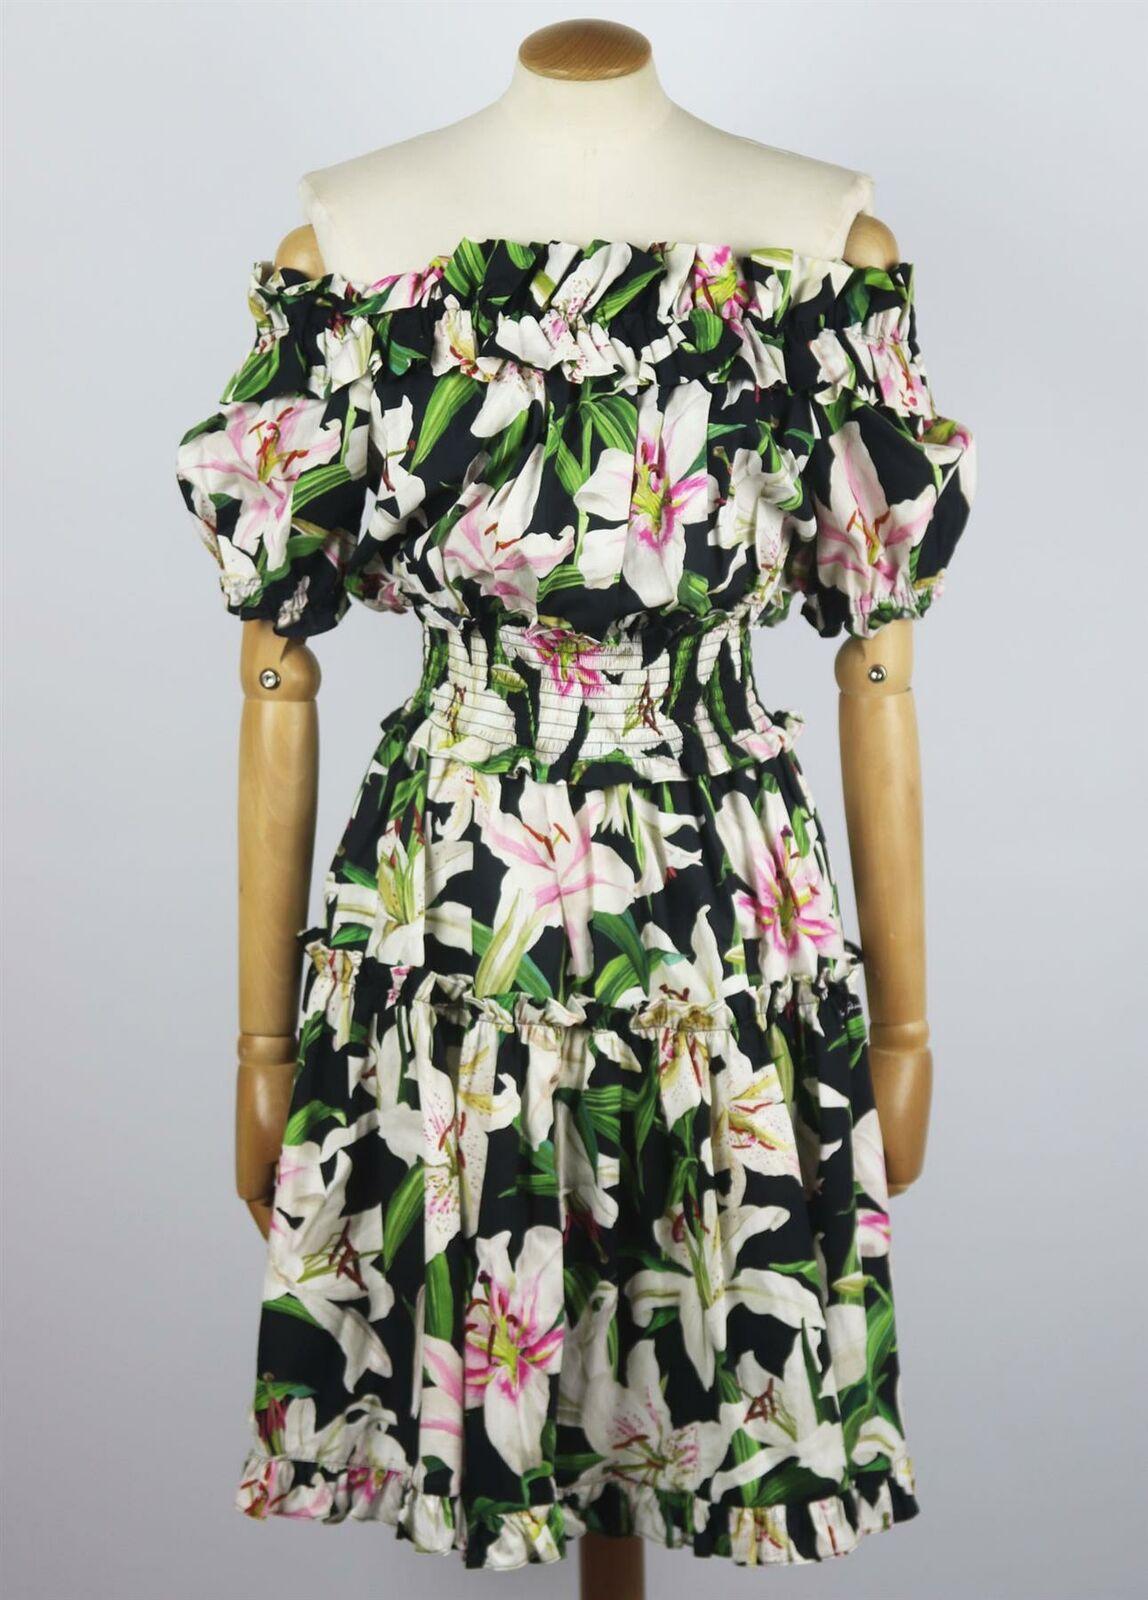 This Dolce & Gabbana dress is cut from naturally light and airy cotton-poplin printed with painterly lilies and trimmed with ruffles from shoulder to hem, the neckline is elasticated to ensure it stays in place, while the waist is shirred to